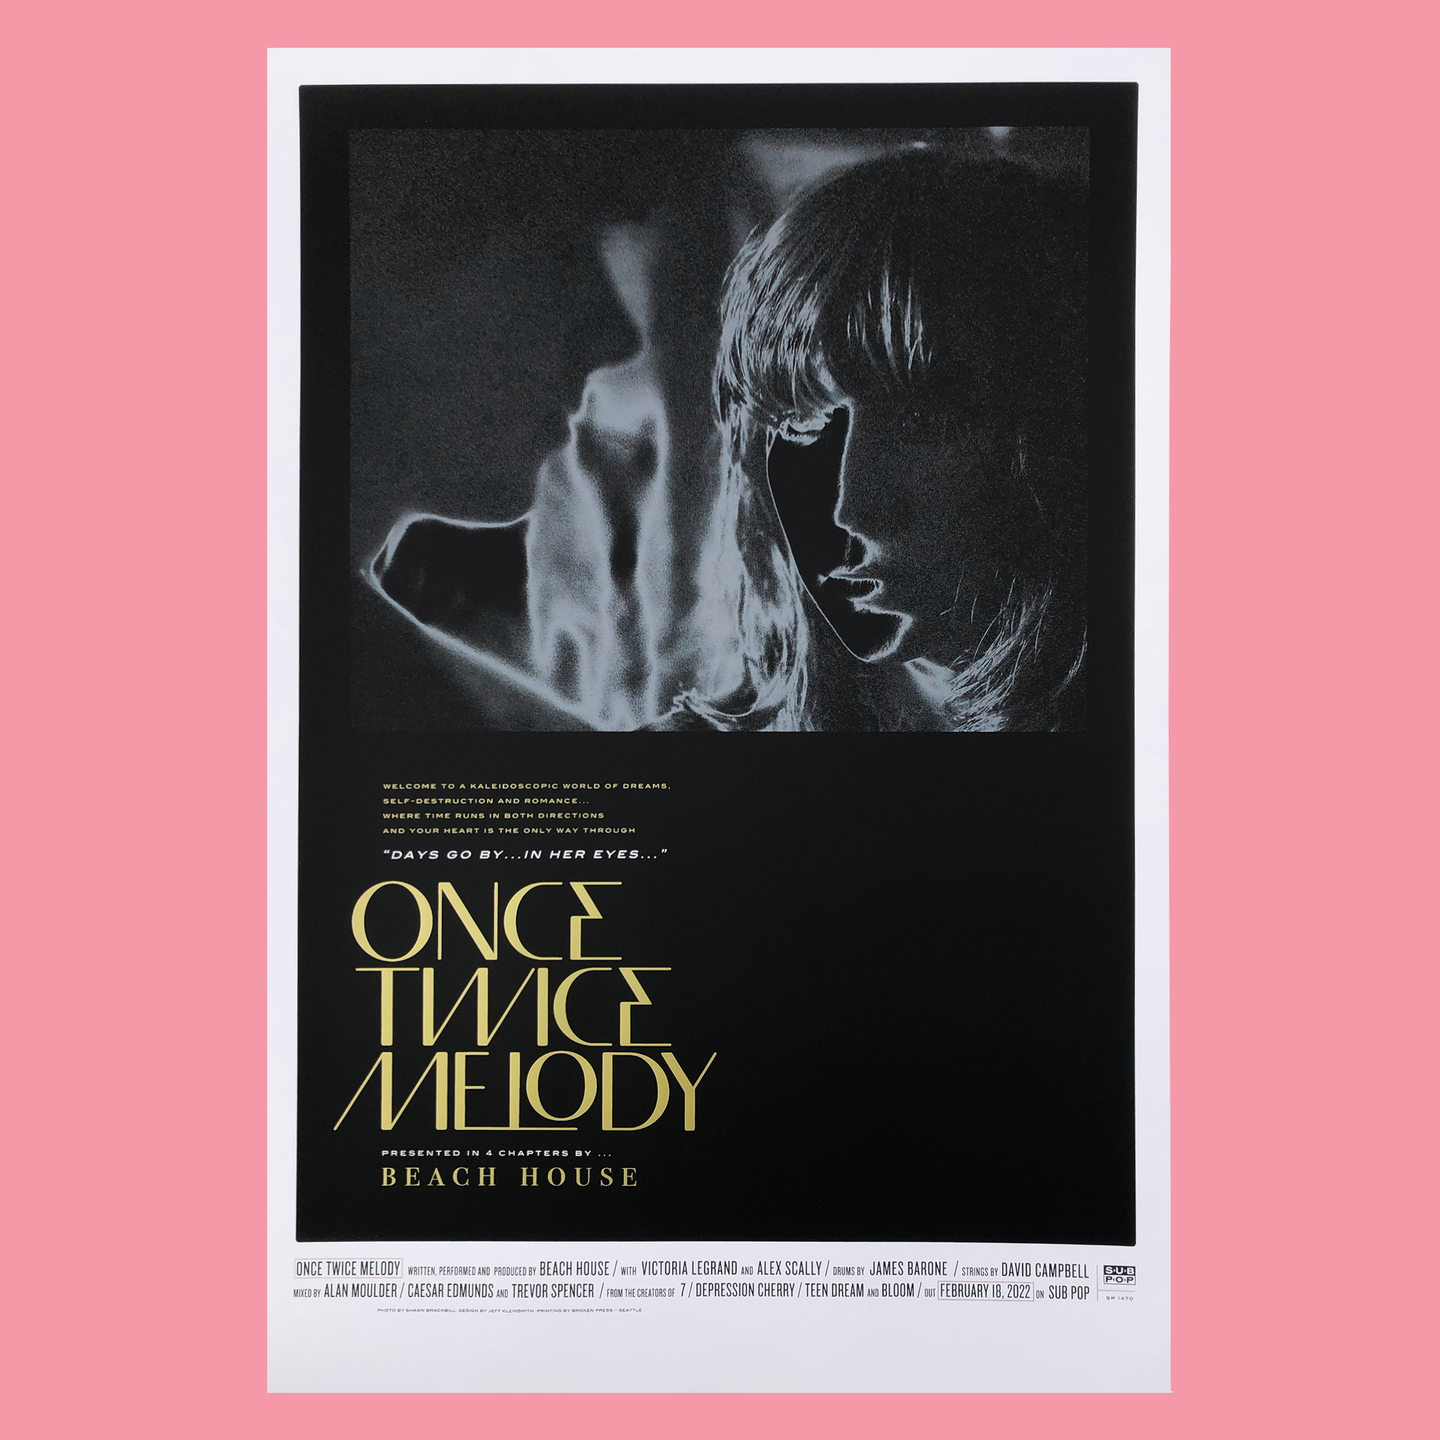 Once Twice Melody Black and White Silk Screen Limited Edition Poster